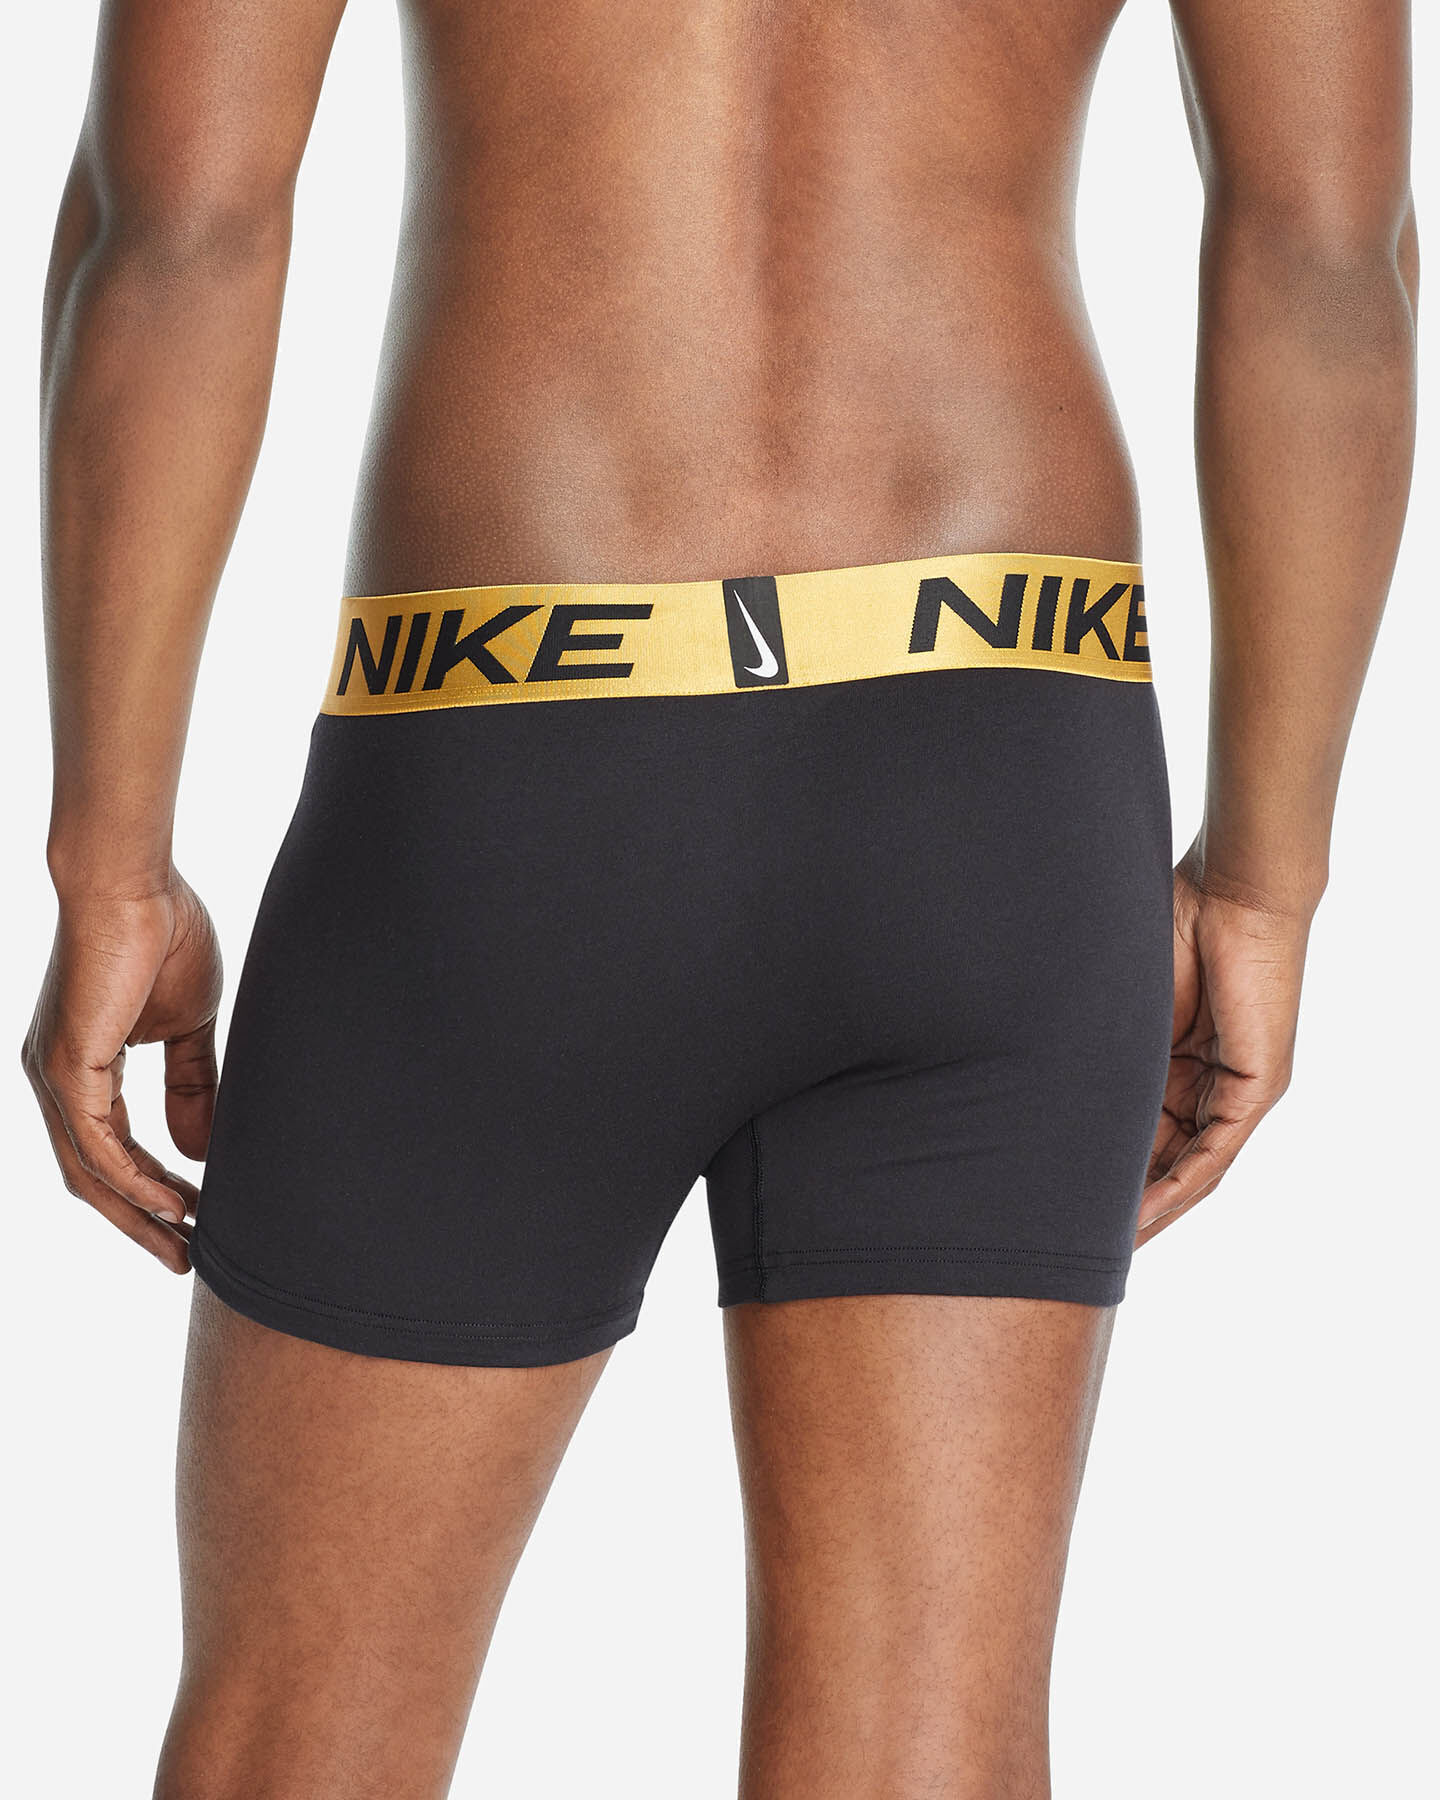  Intimo NIKE BOXER LUXE M S4099892|M1Q|XL scatto 3